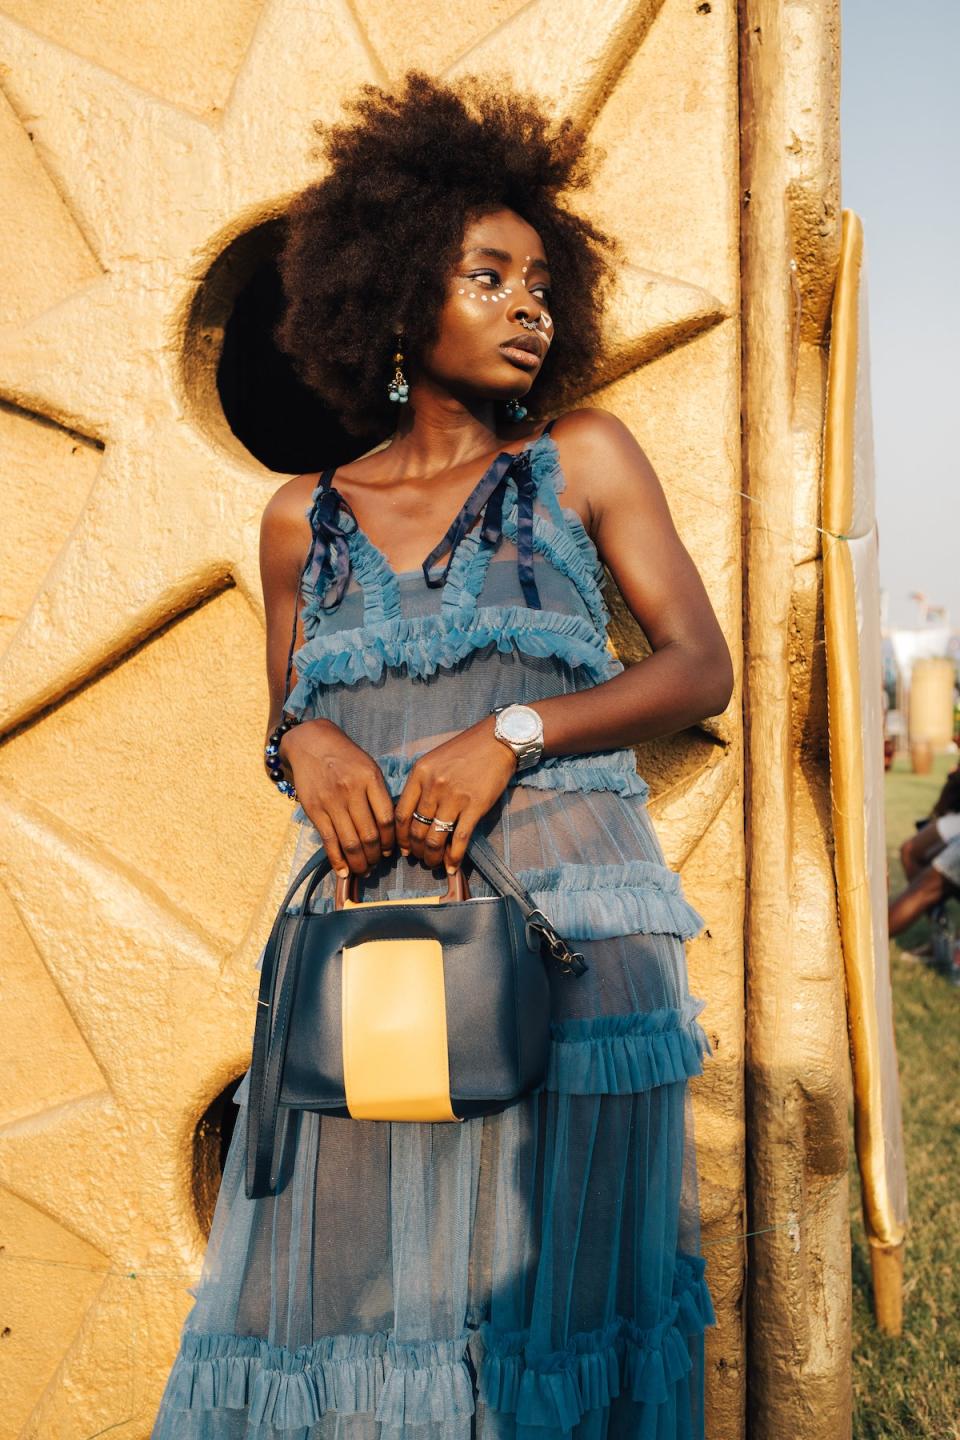 Images from Afrochella 2019, Ghana's Most Stylish Music Festival